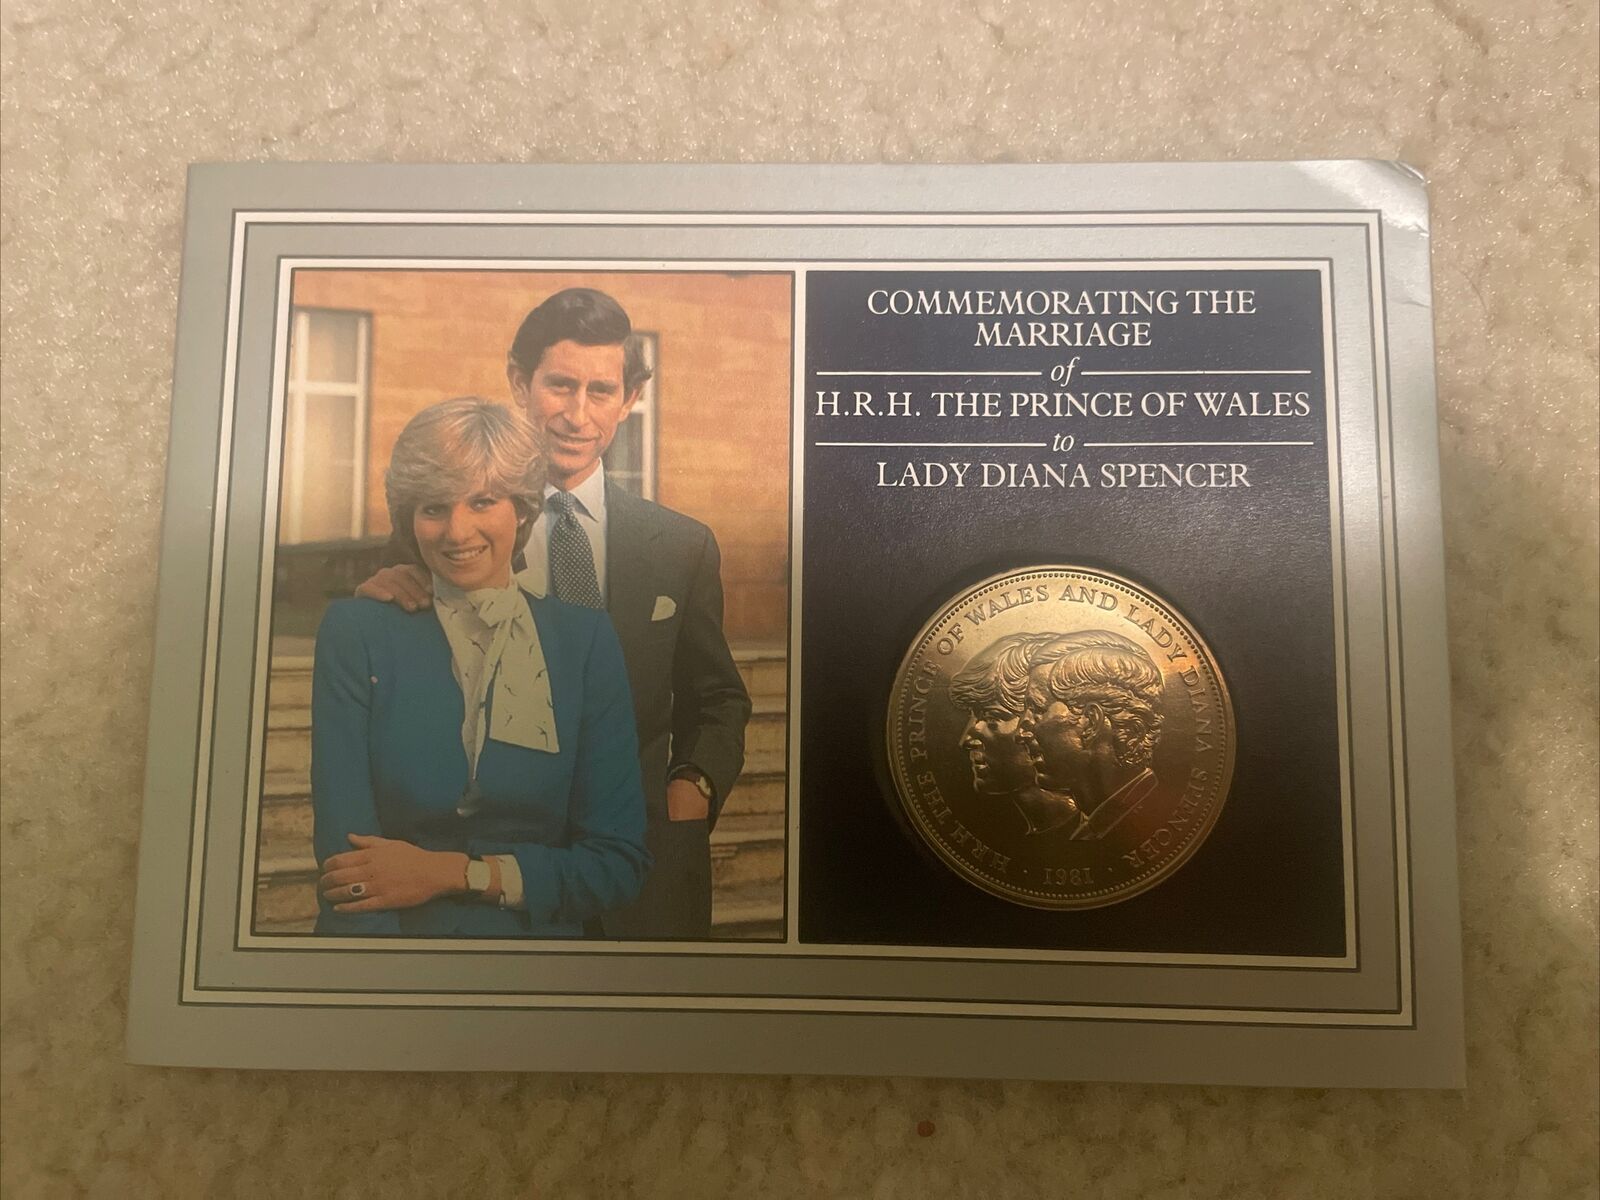 1981 Princess Diana And Prince Charles Commemorative Coin In Original Packaging